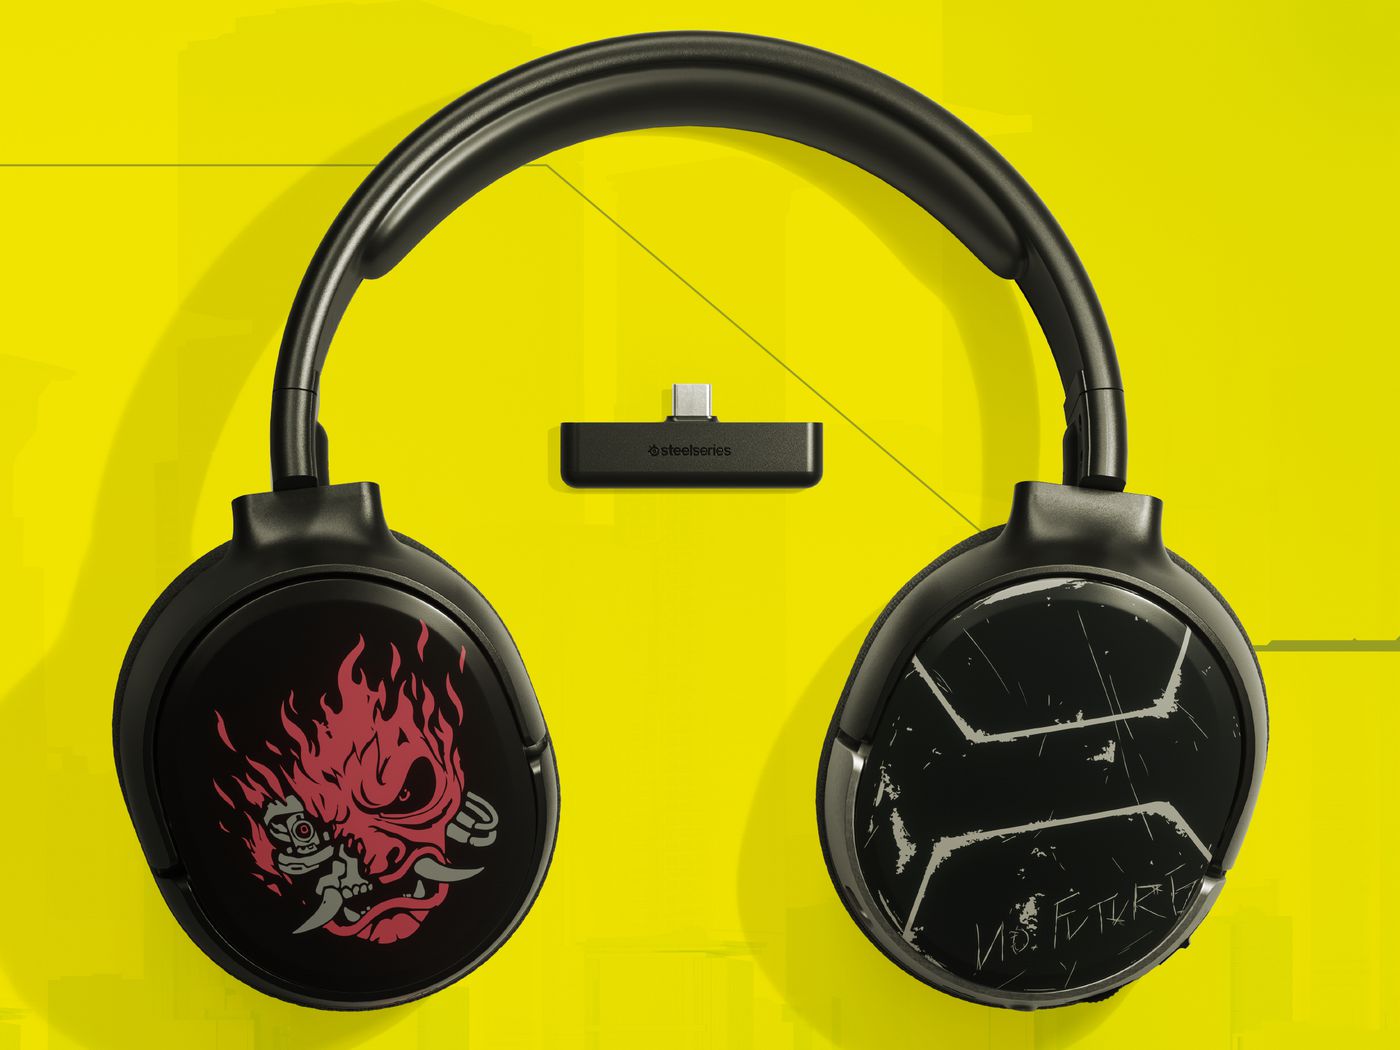 SteelSeries announces Cyberpunk 2077-themed gaming headsets and 